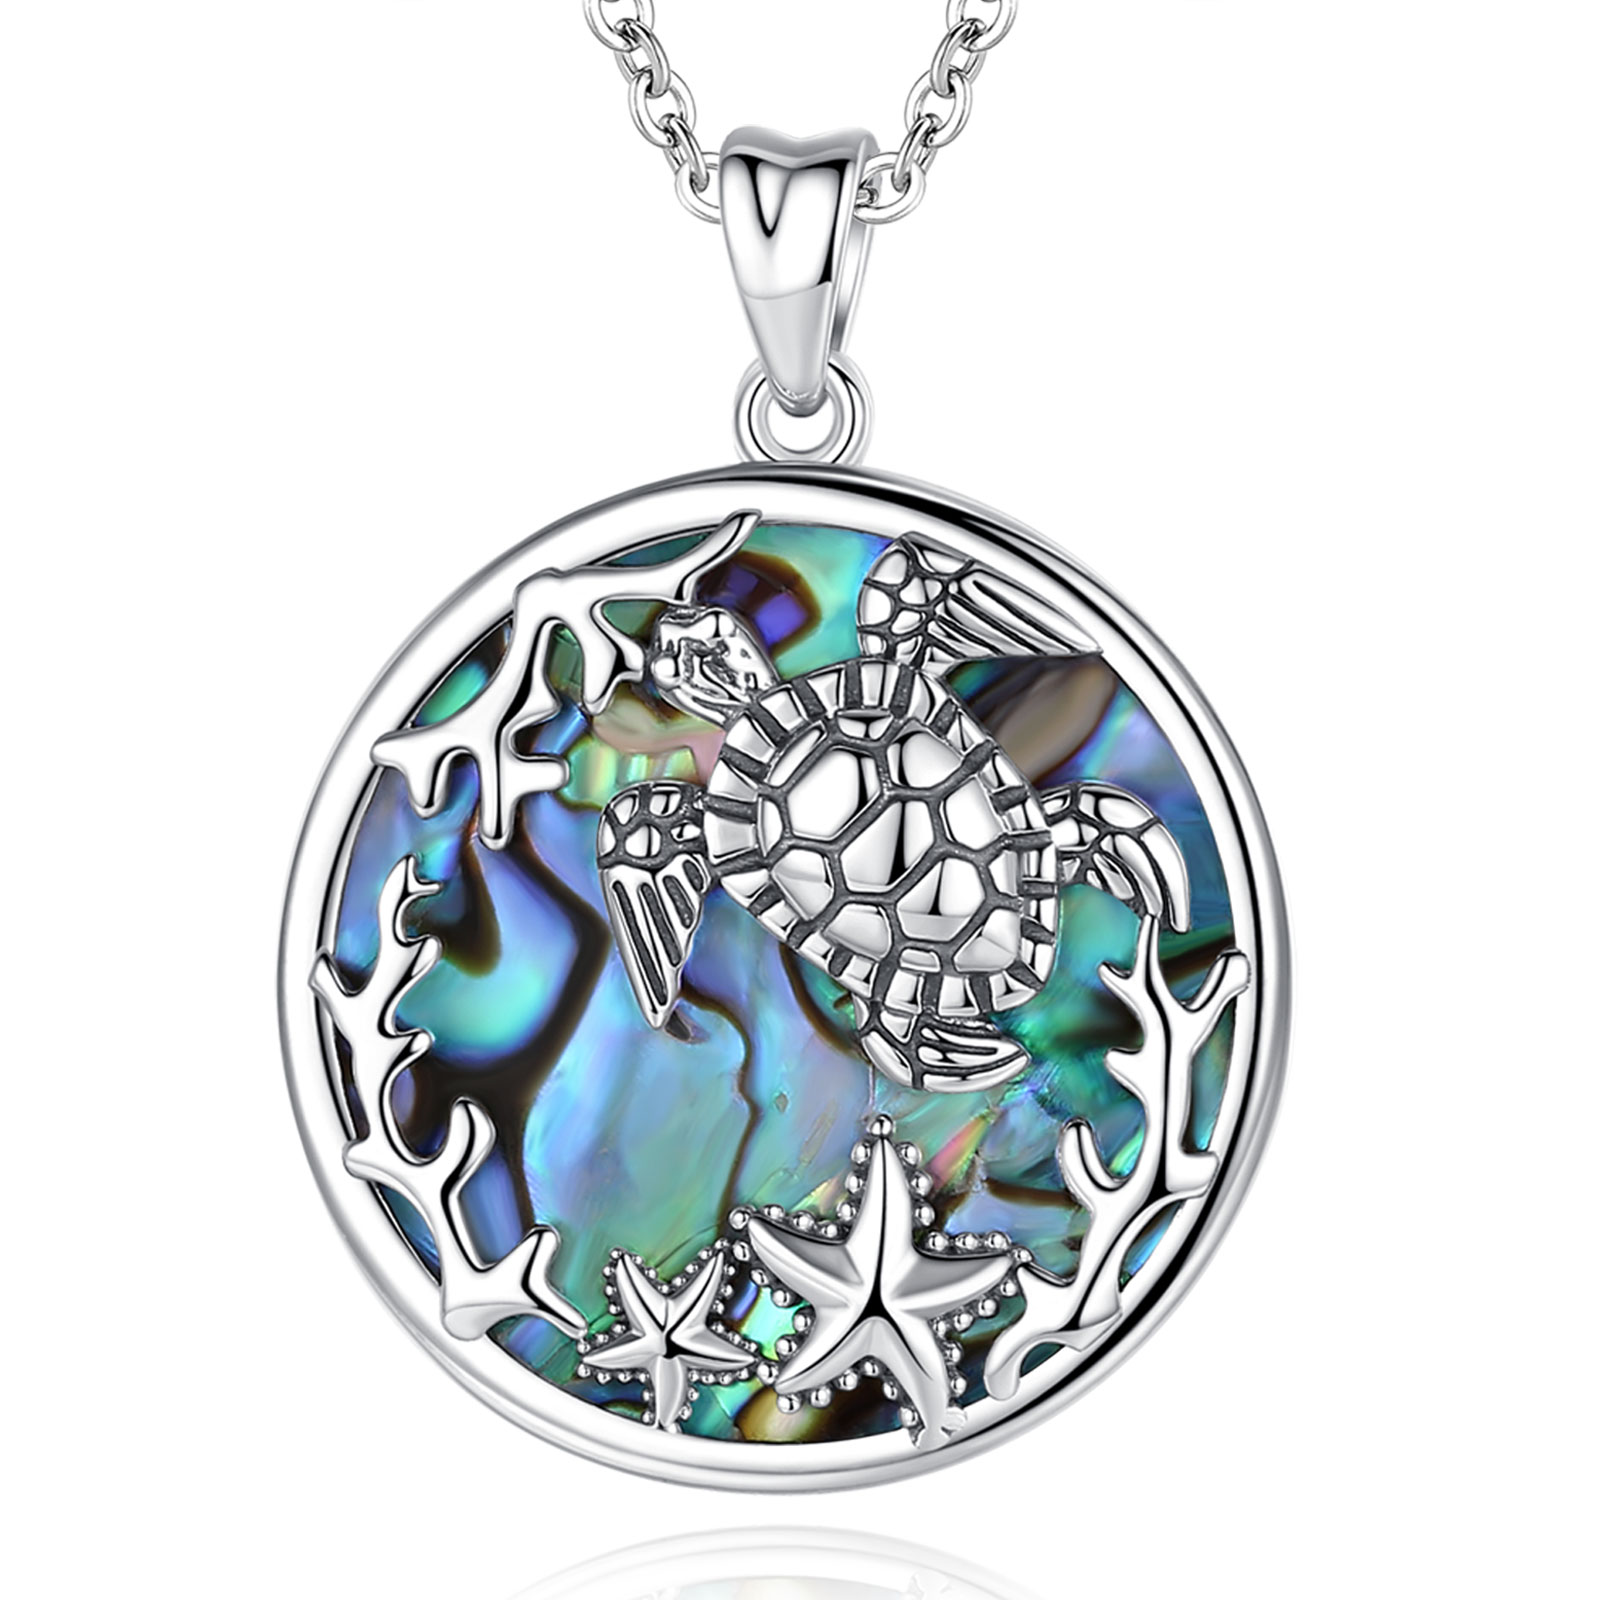 Merryshine Jewelry S925 Sterling Silver Sea Turtle Round Mother of Pearl Necklace Pendant